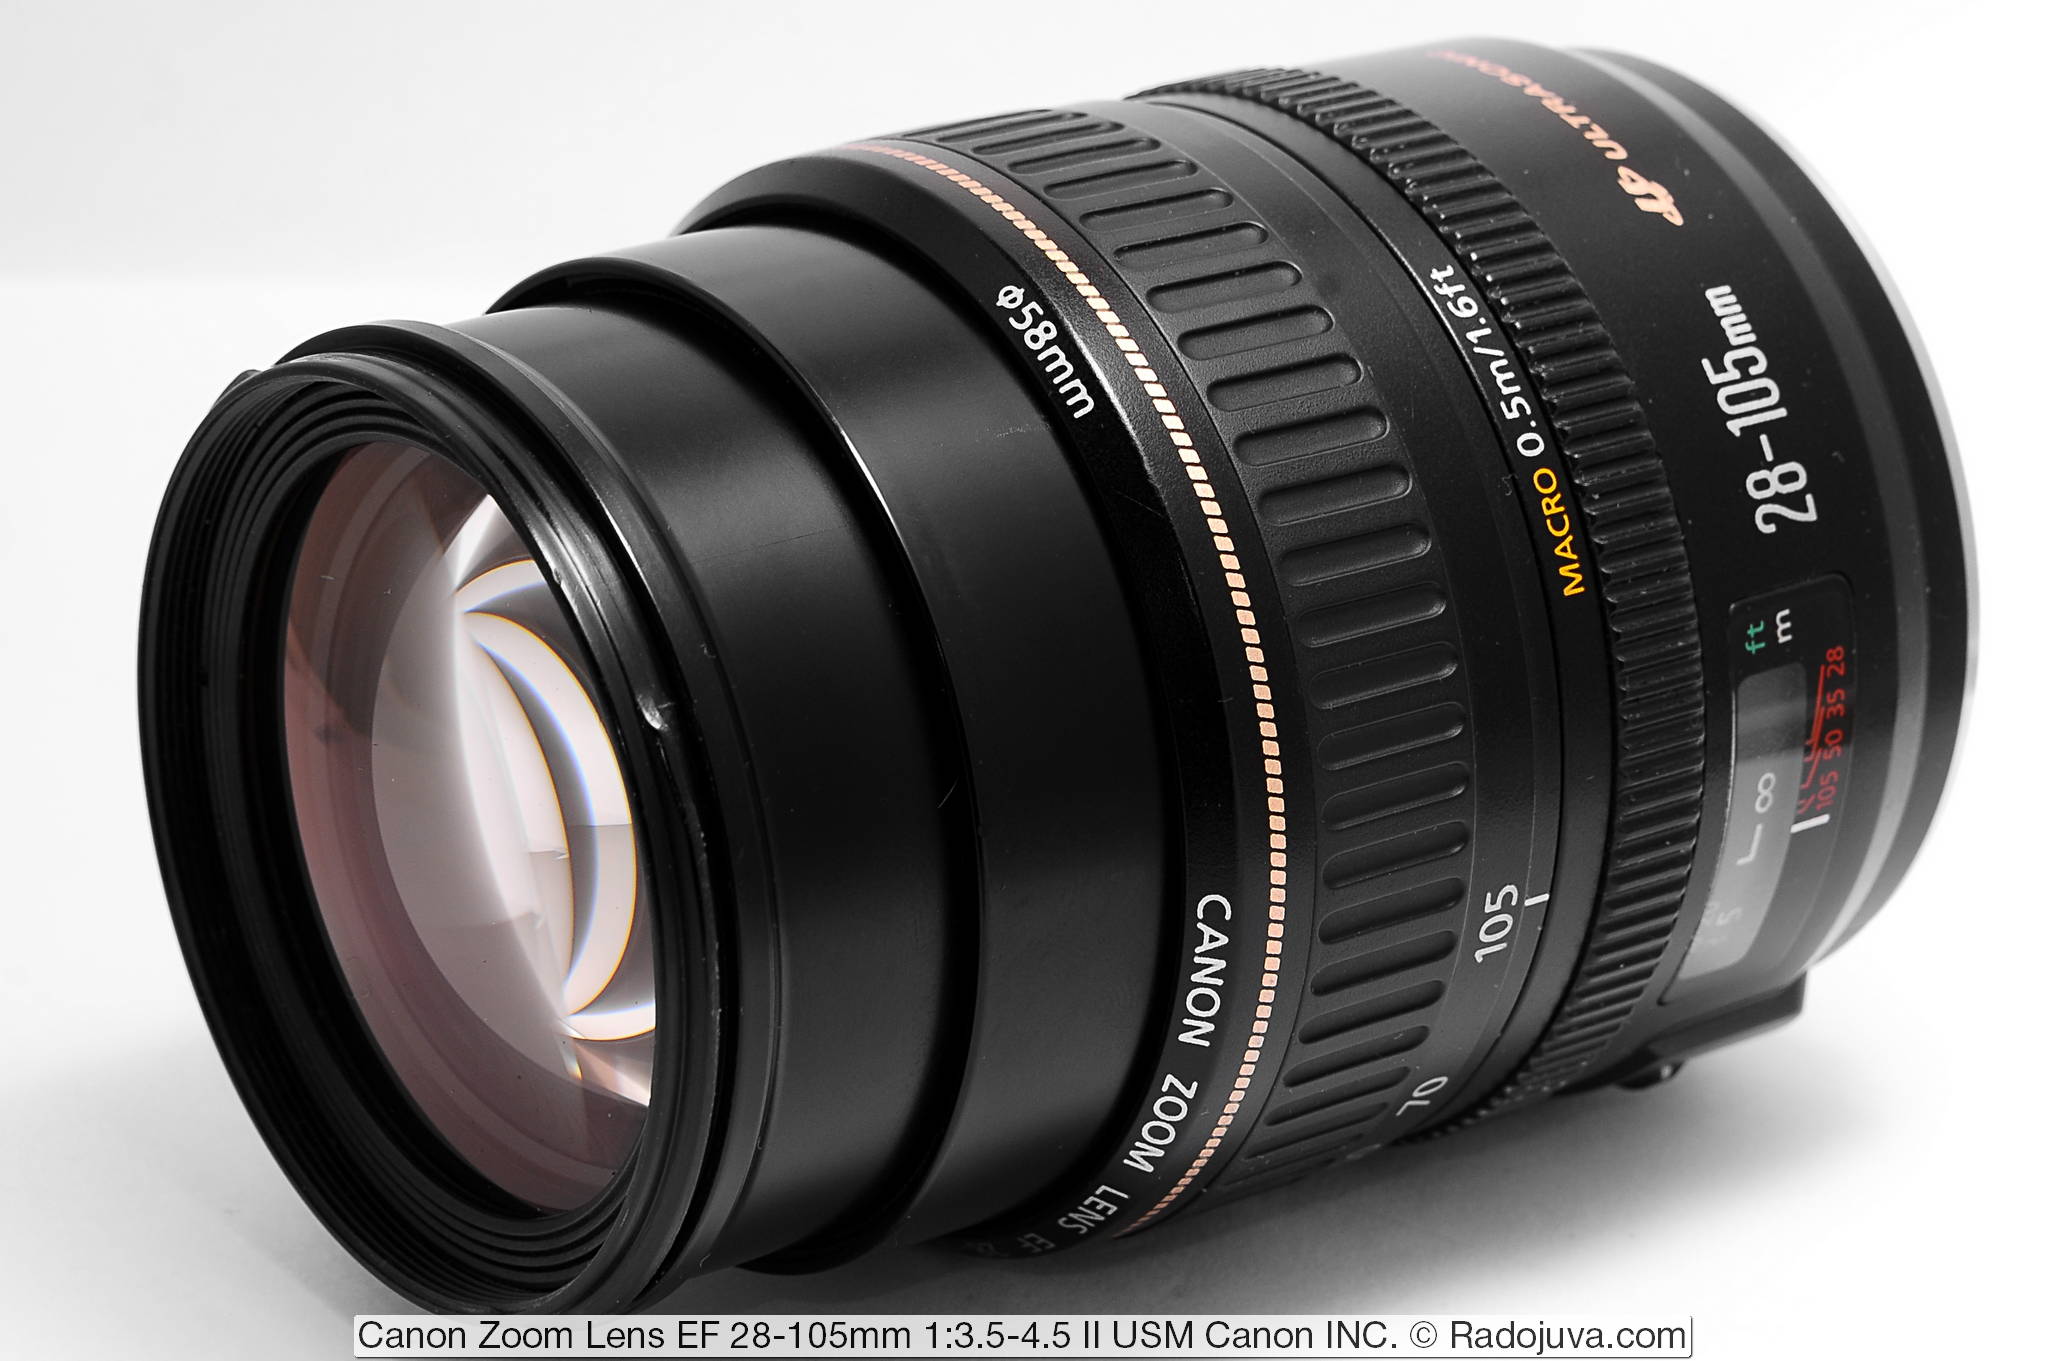 Canon Zoom Lens EF 28-105mm 1 at a Glance: 3.5-4.5 II USM | Happy